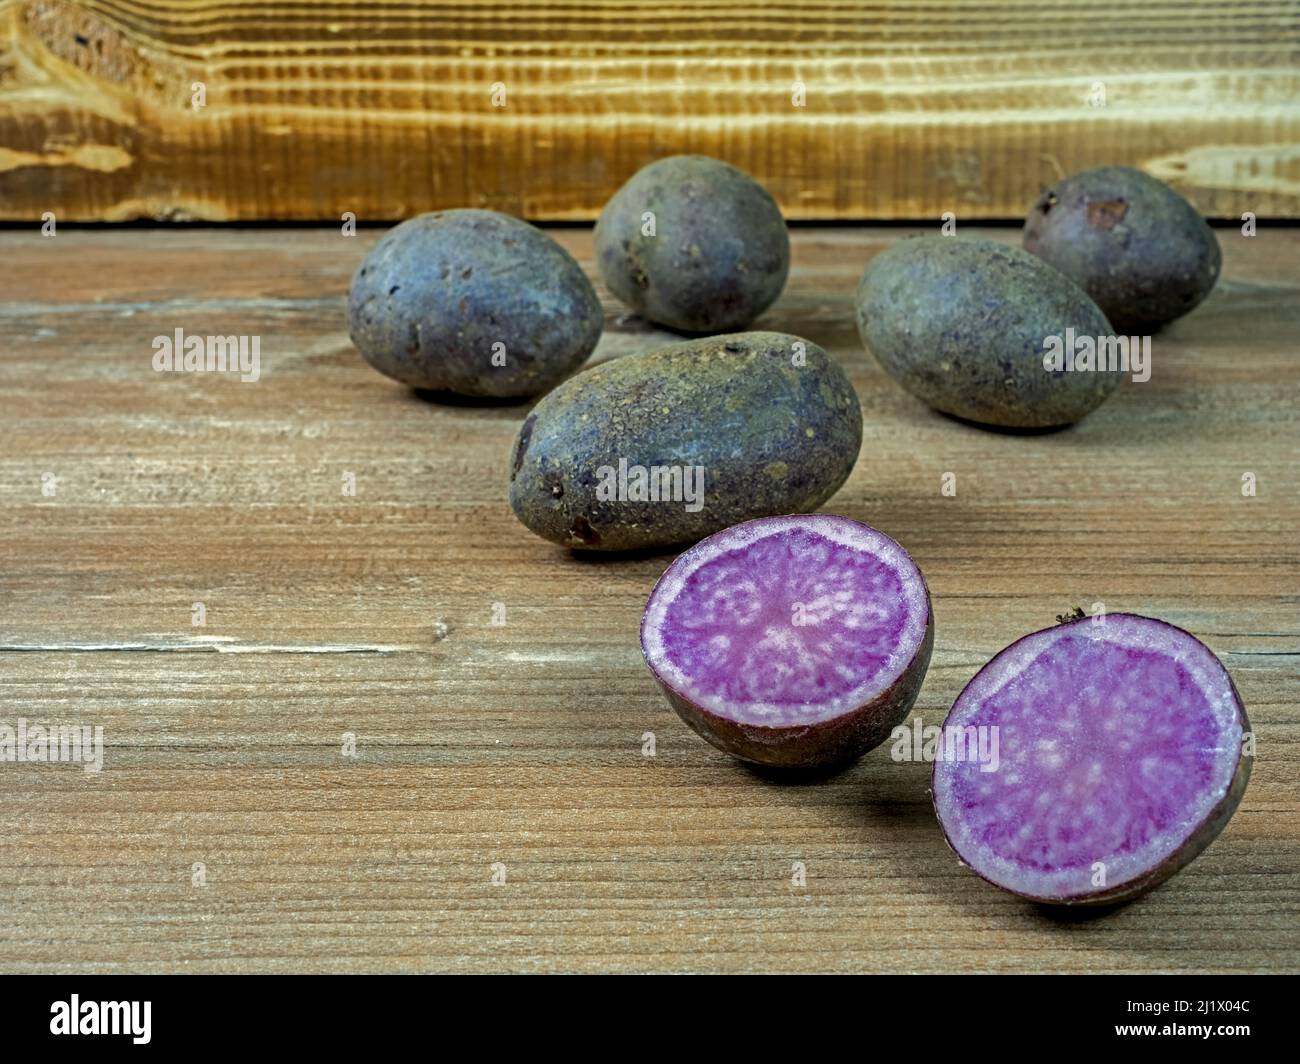 Several potatoes of purple variety Violetta on wood in front of a wooden box, one potato cut Stock Photo